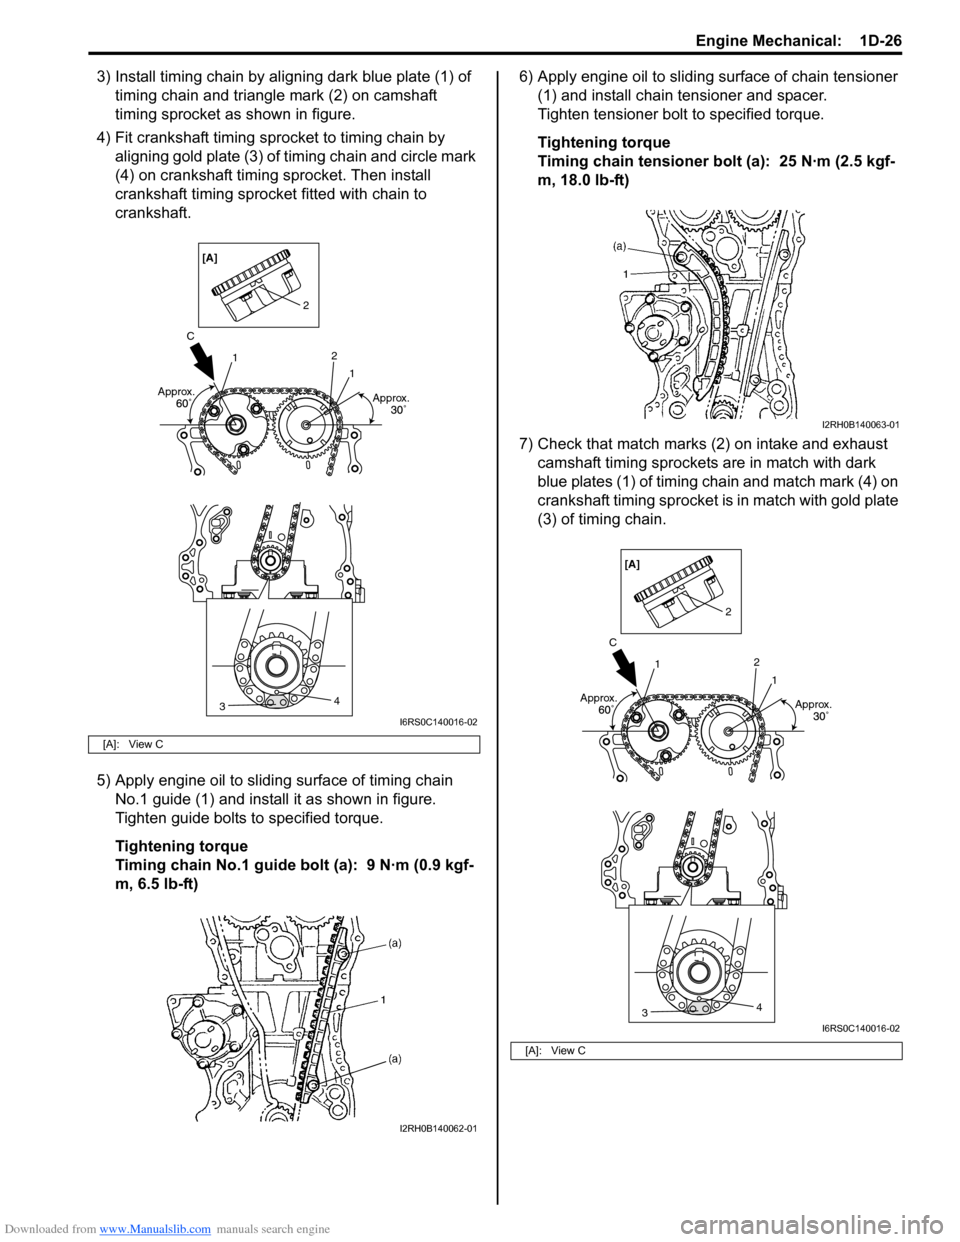 SUZUKI SWIFT 2006 2.G Service Owners Guide Downloaded from www.Manualslib.com manuals search engine Engine Mechanical:  1D-26
3) Install timing chain by aligning dark blue plate (1) of timing chain and triangle mark (2) on camshaft 
timing spr